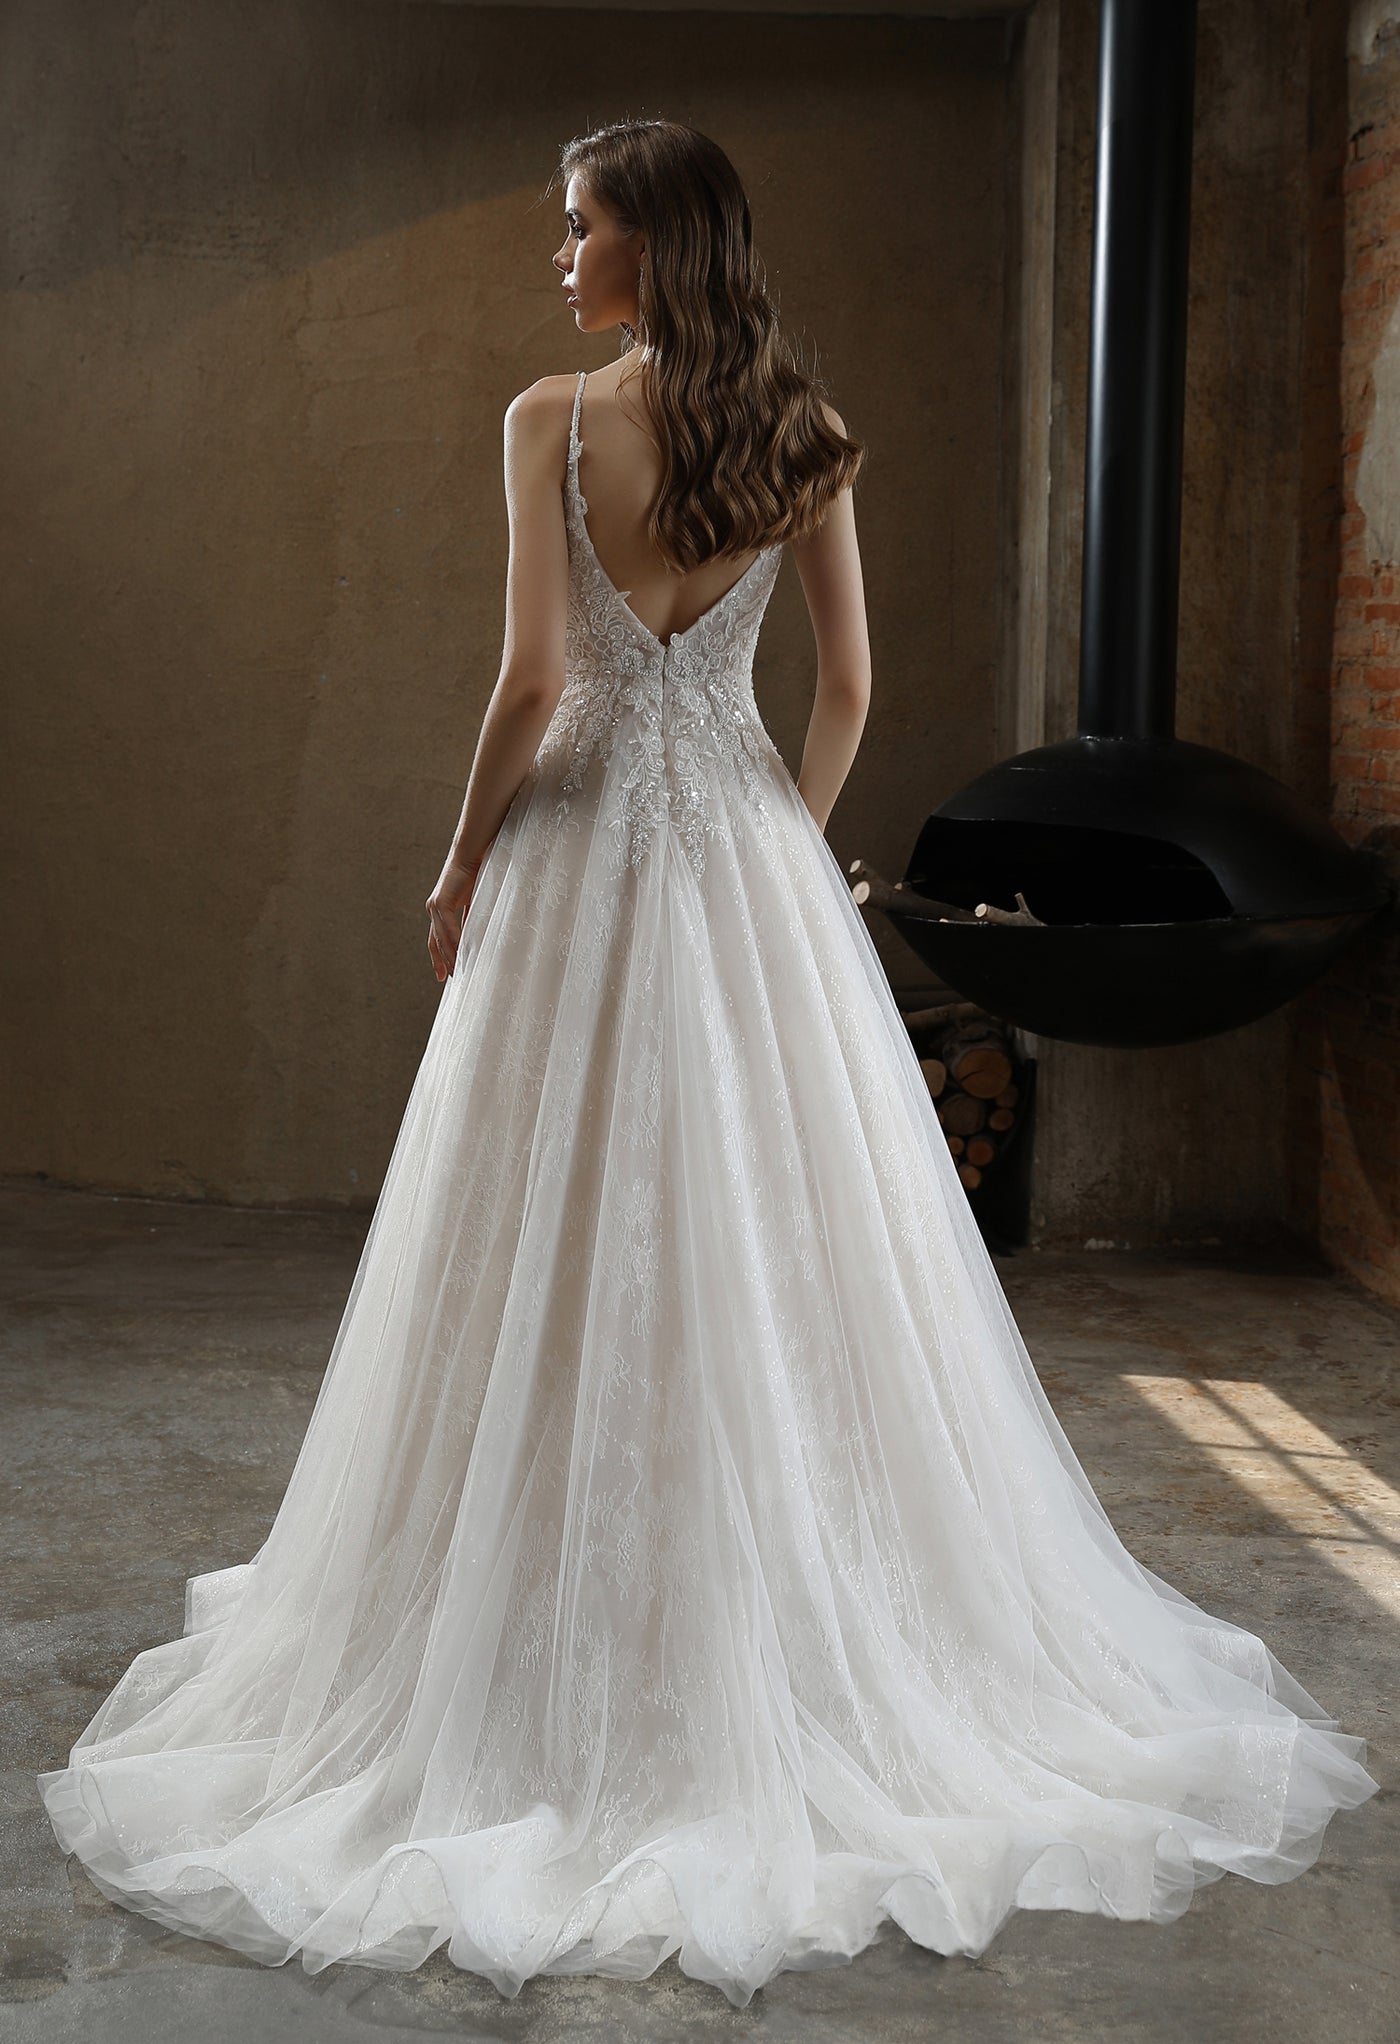 The back view of a Bergamot Bridal Beaded A-Line Wedding Dress with Spaghetti Straps at a bridal shop.